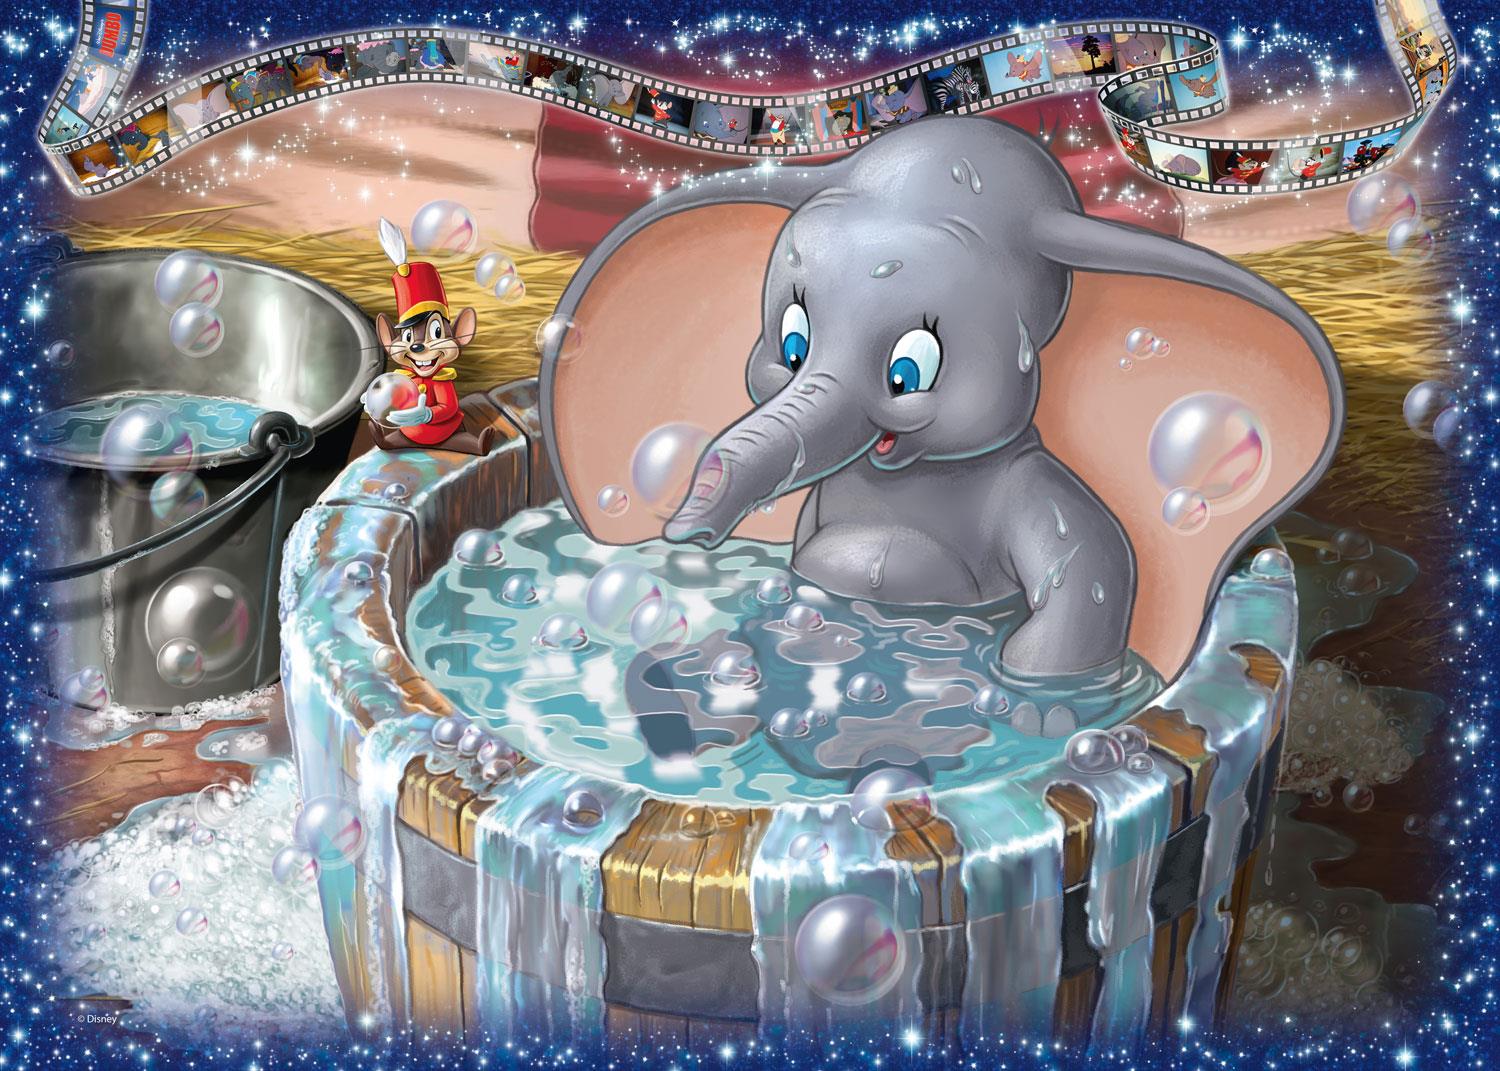 Ravensburger Disney Collector's Edition Dumbo Jigsaw Puzzle (1000 Pieces)